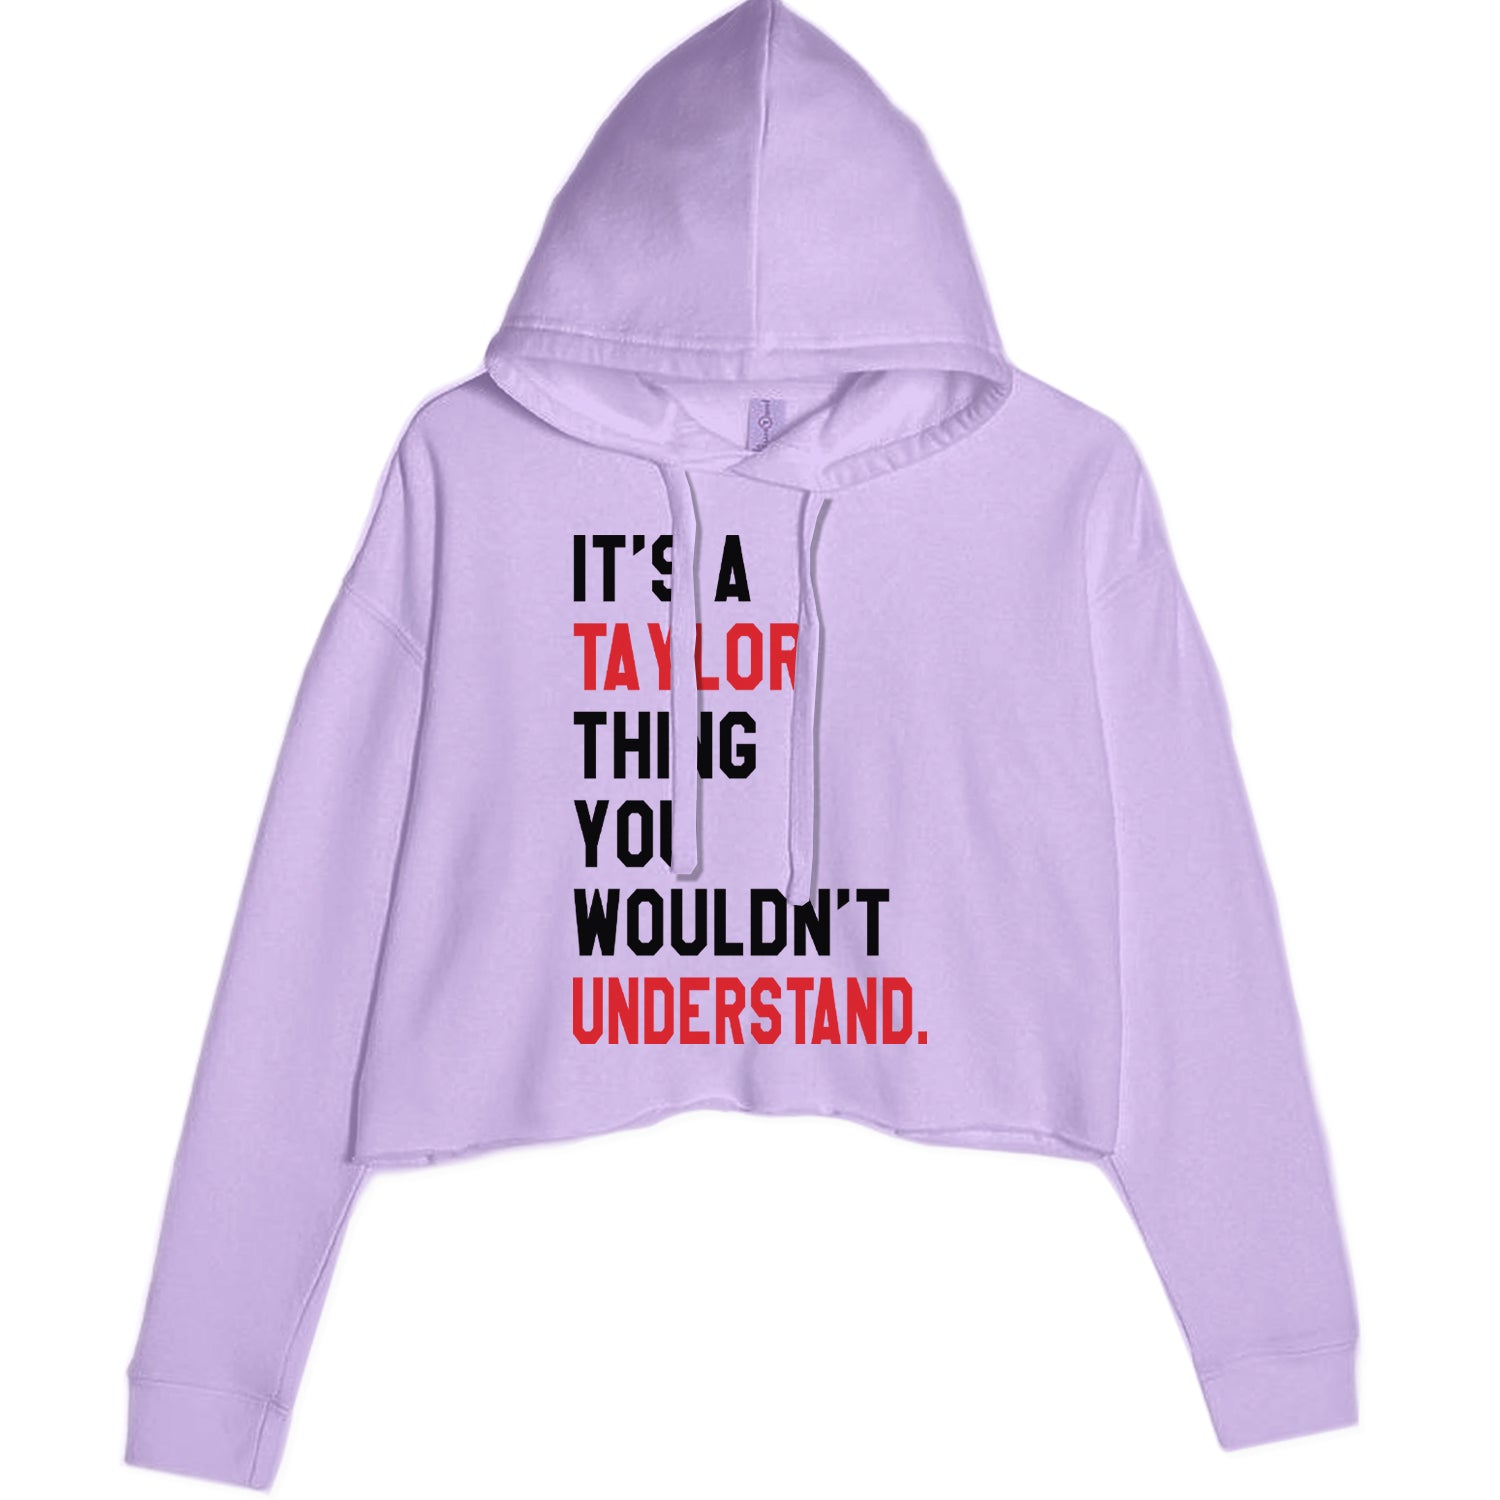 You Wouldn't Understand It's A Taylor Thing TTPD Cropped Hoodie Sweatshirt